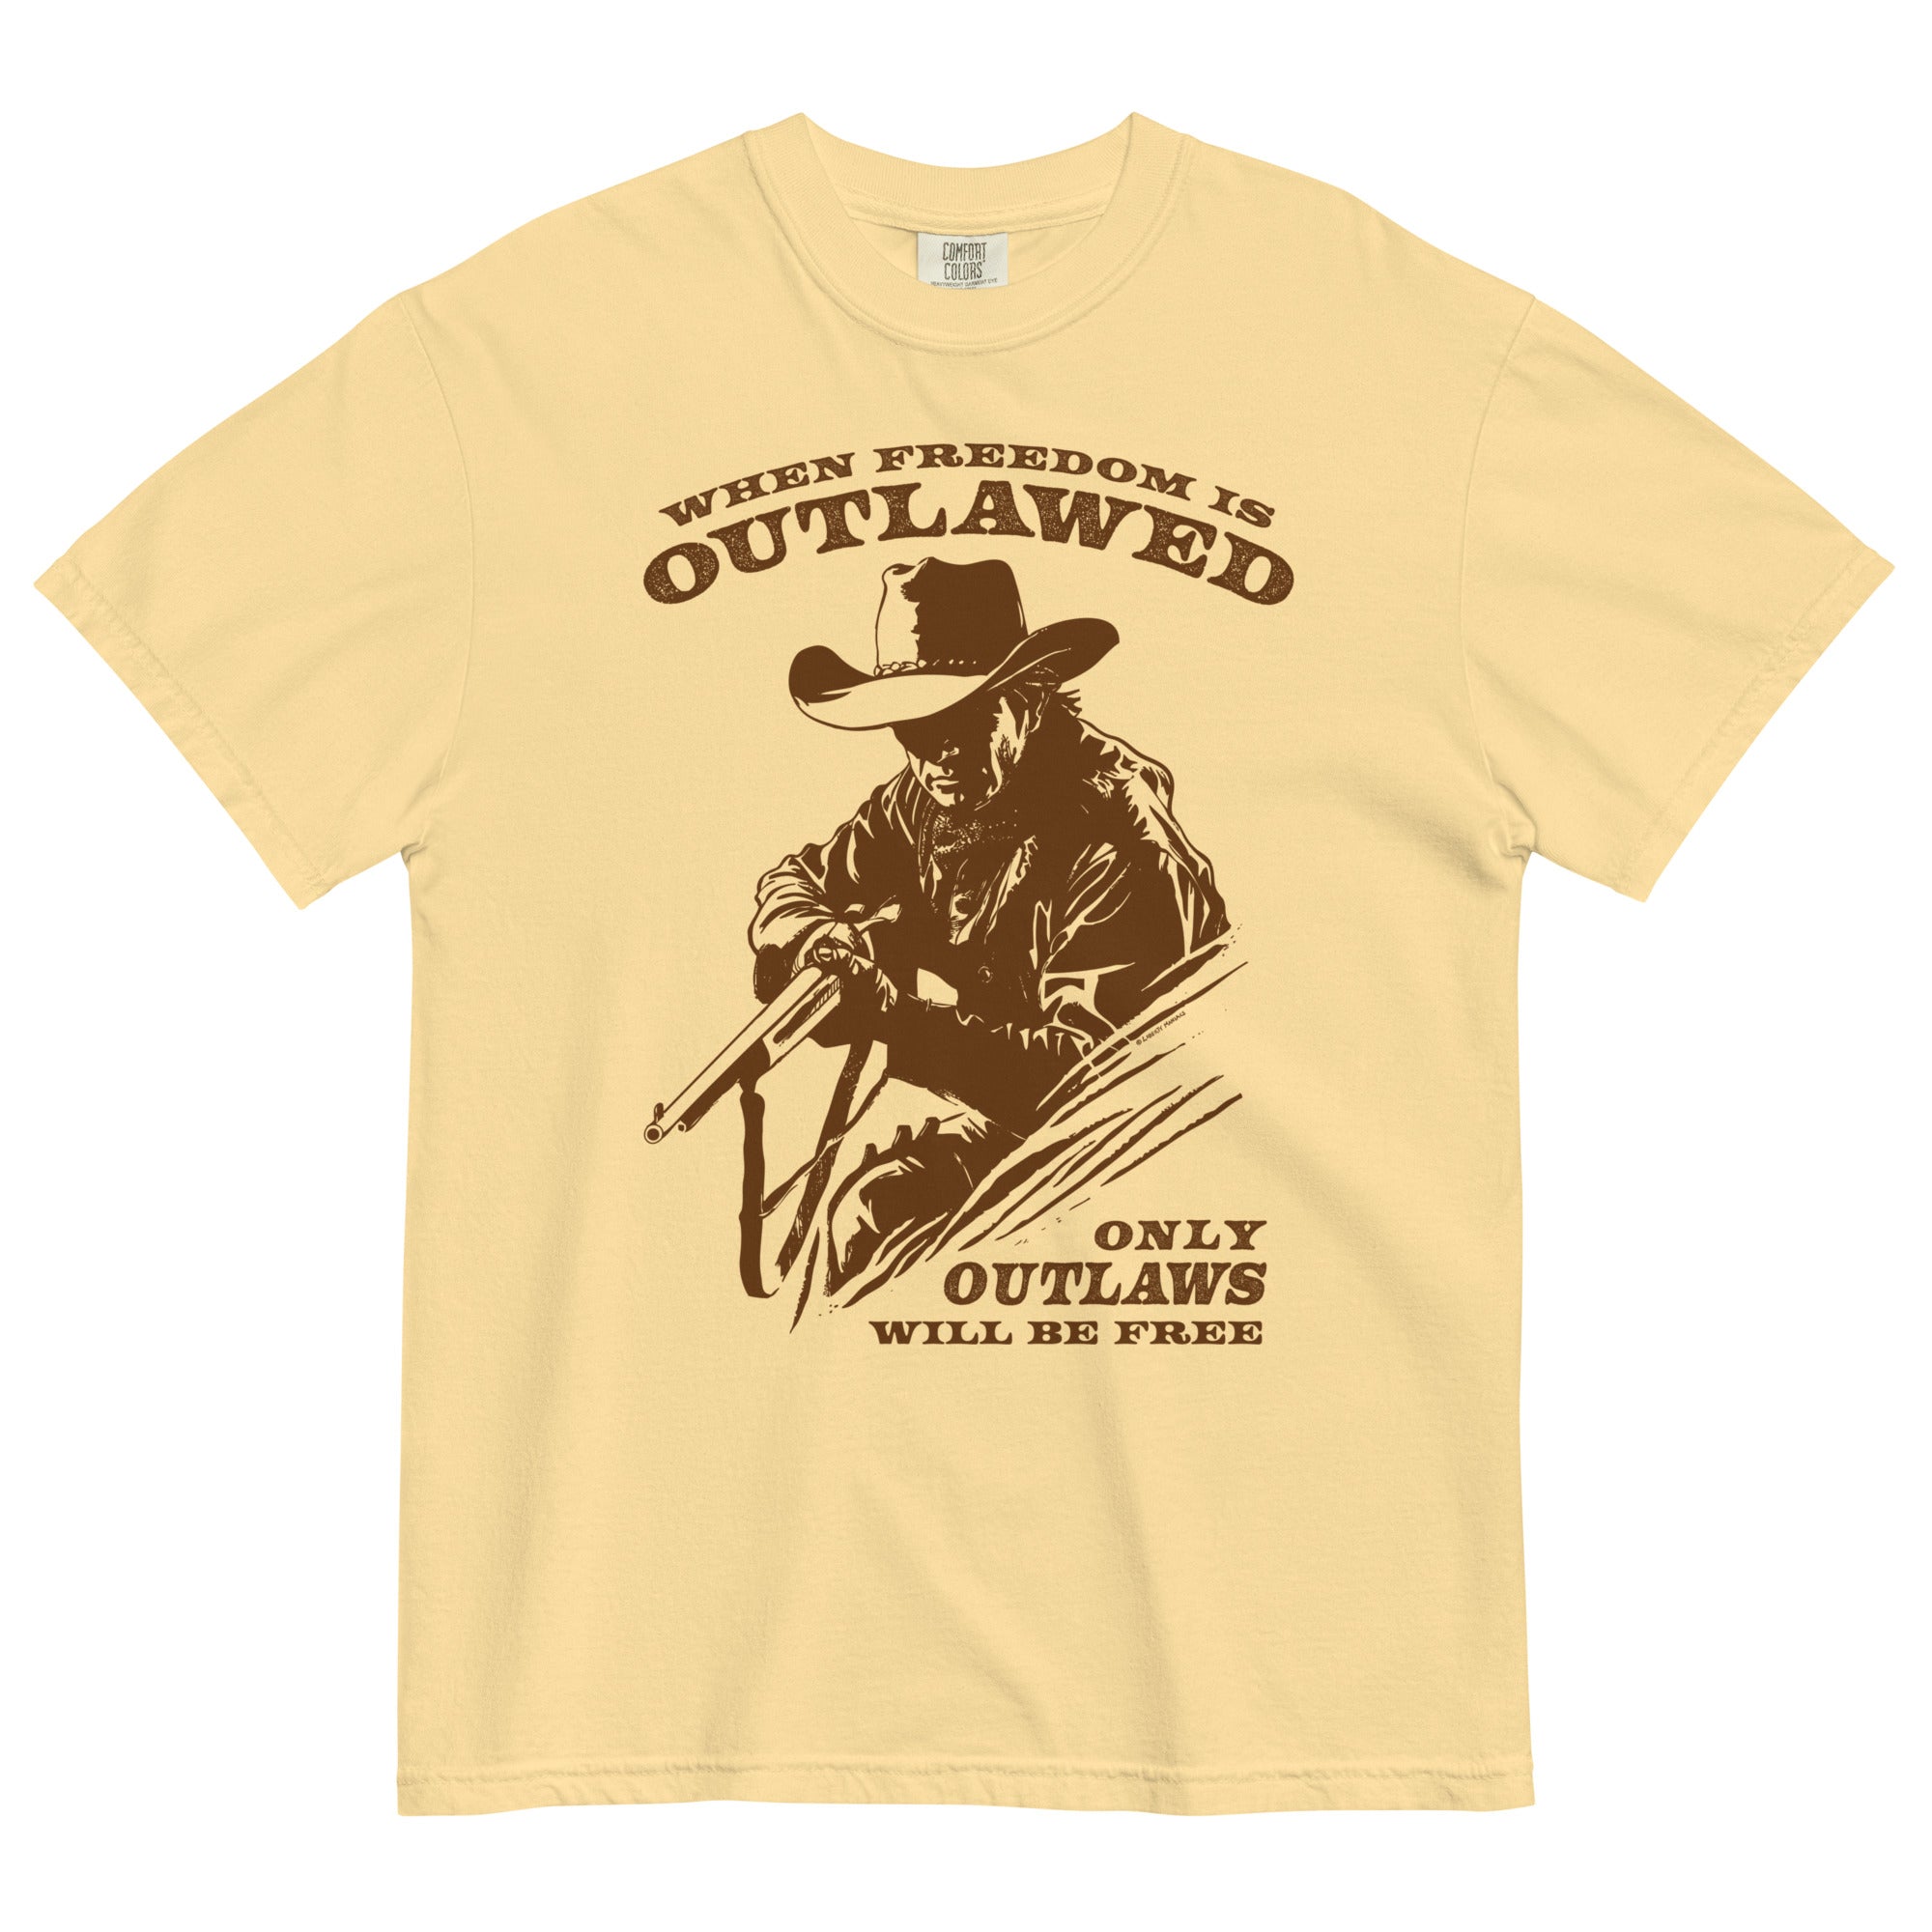 When Freedom is Outlawed Only Outlaws Will Be Free Heavyweight T-Shirt